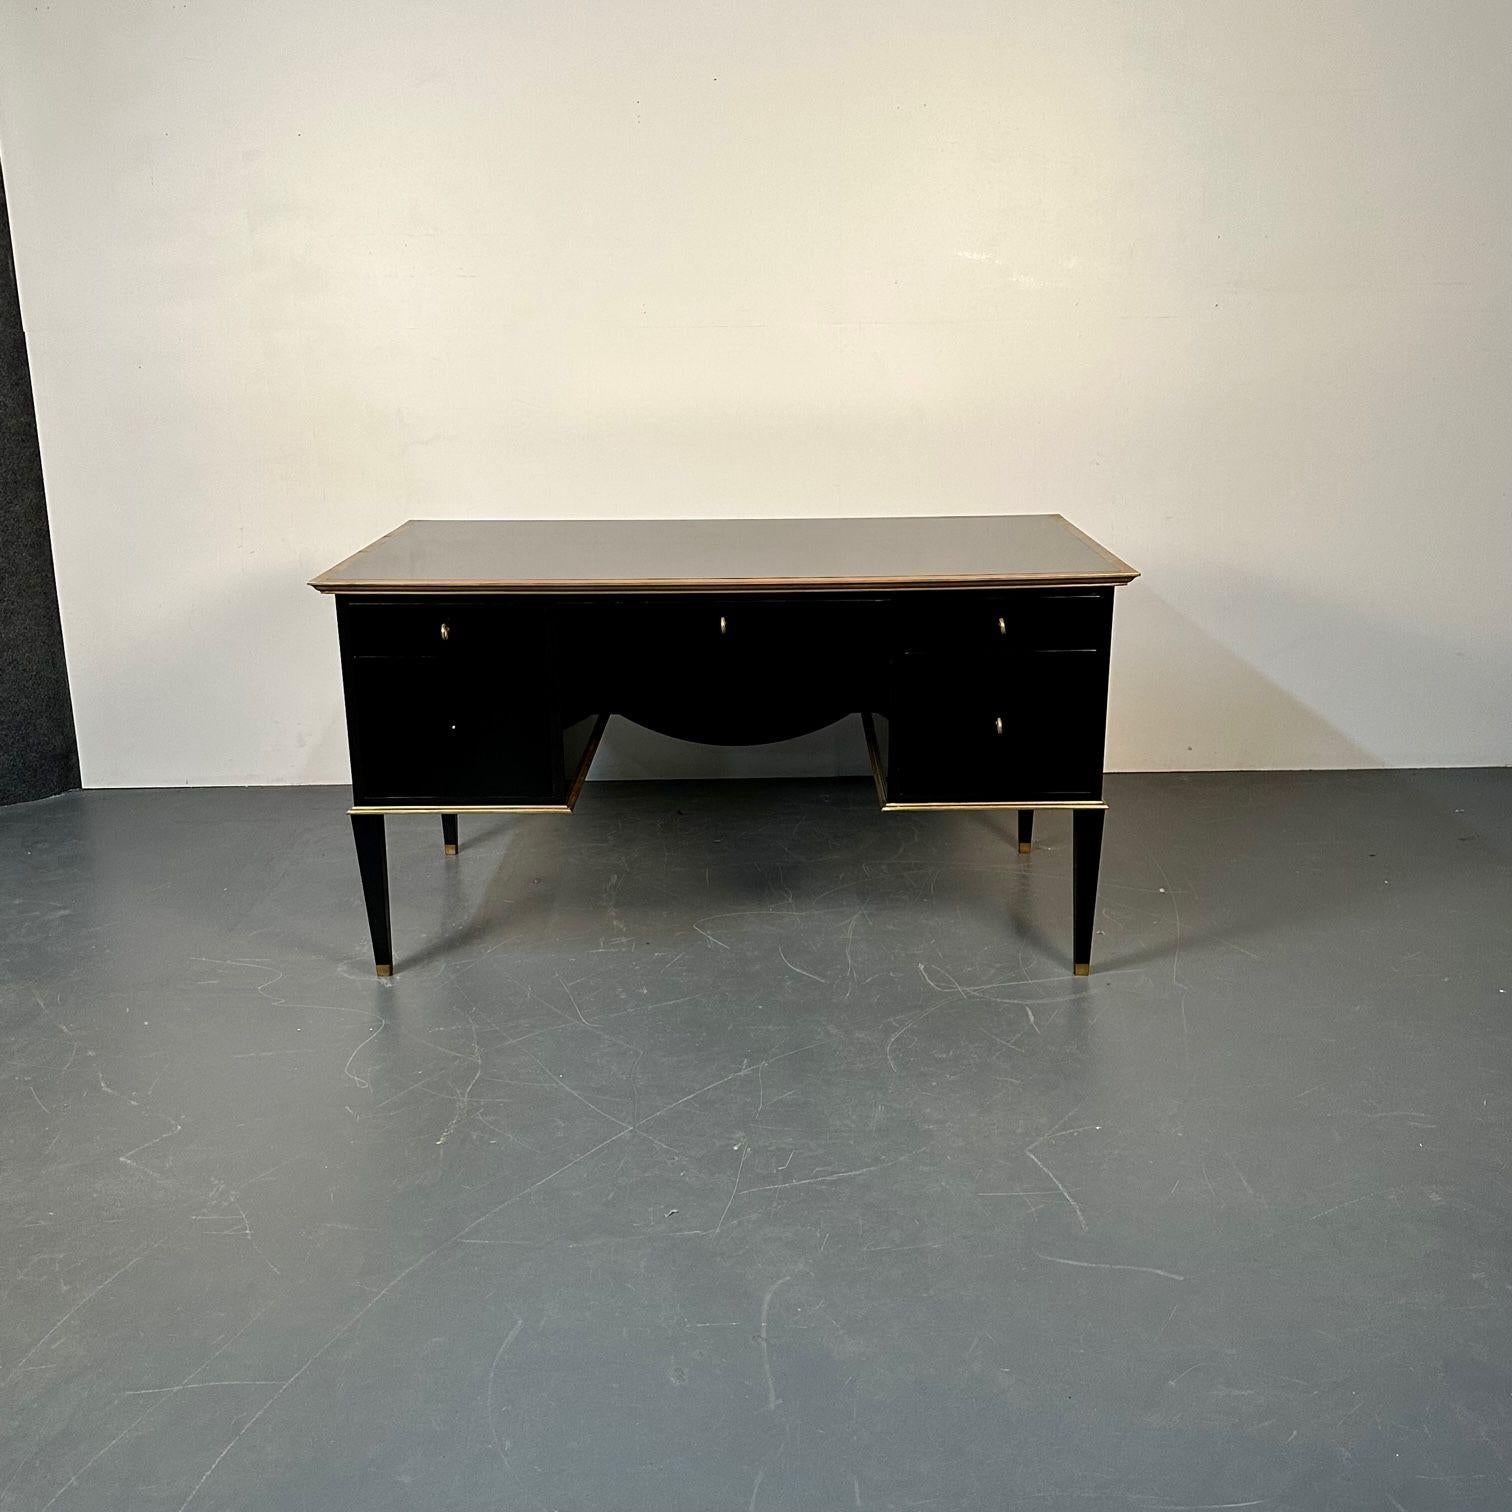 French Hollywood Regency Style Ebony Lacquer Executive Desk / Writing Table
 
A spectacular Executive Desk that can sit Center of any room or office. The finest ebony finish having bronze framing throughout. Three drawers over two large deep drawers